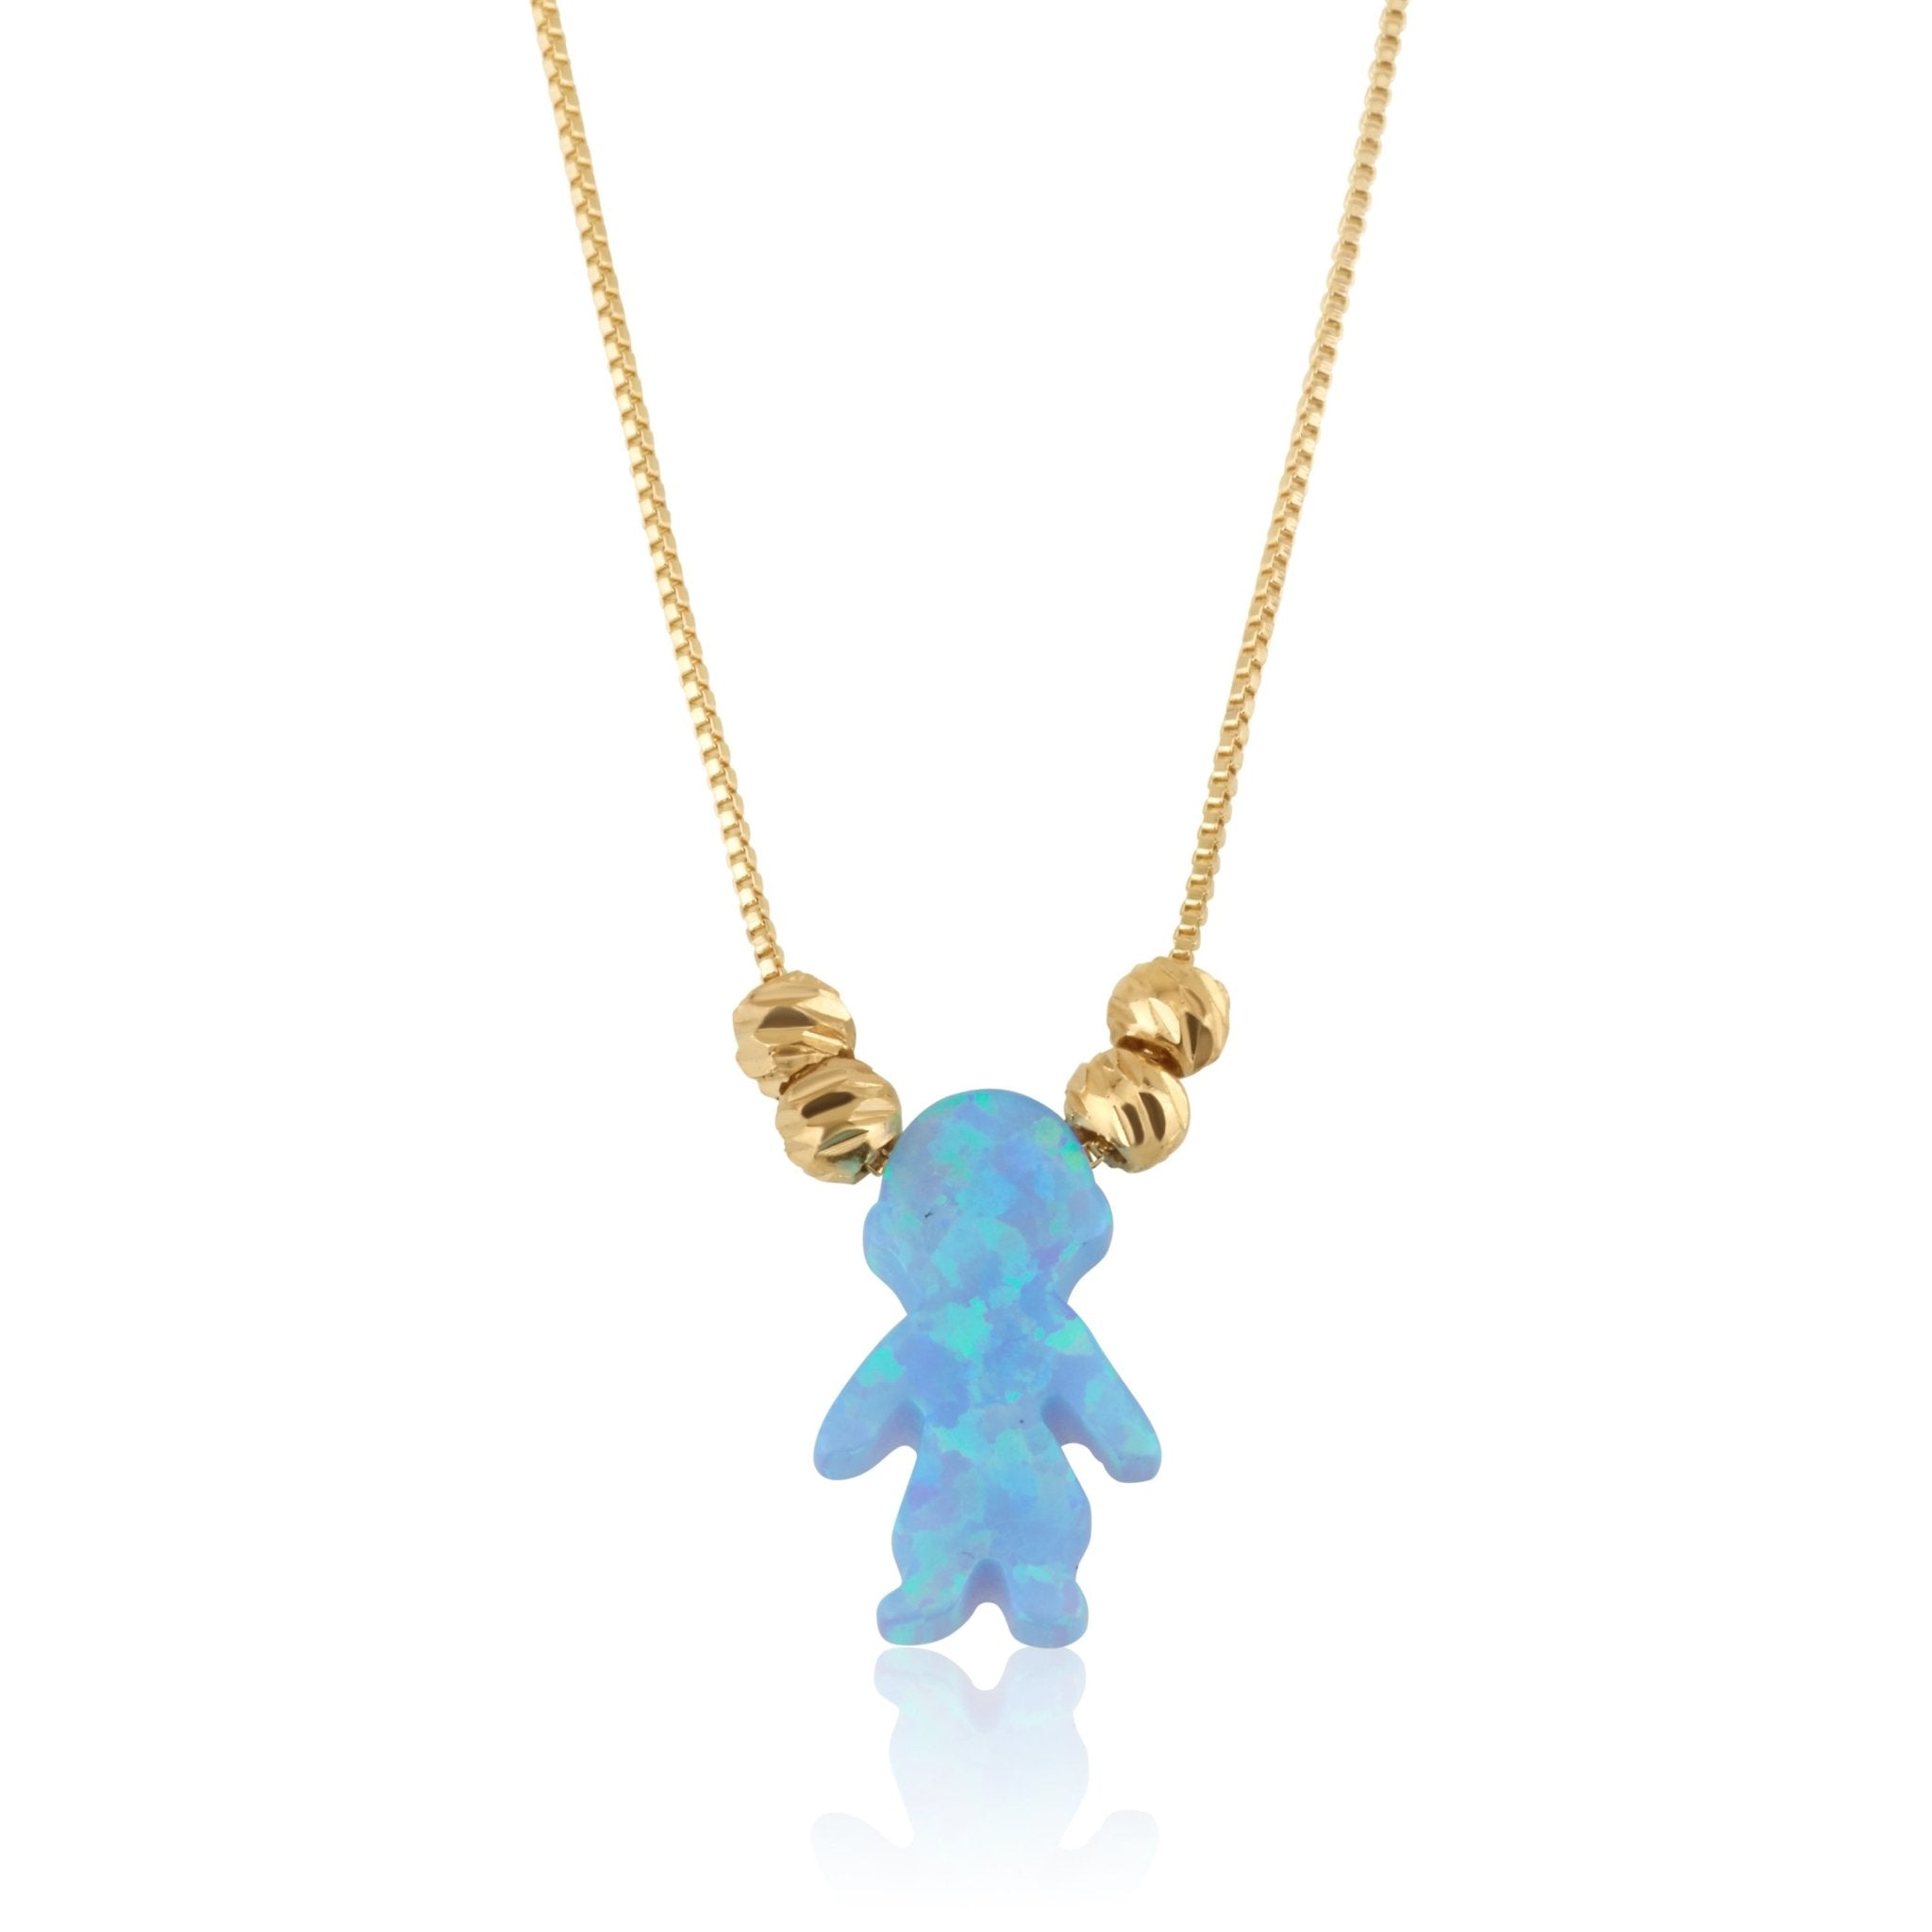 SONOGRAM Necklace, Your baby's sonogram on a necklace - Ultrasound jewelry  – Now That's Personal!